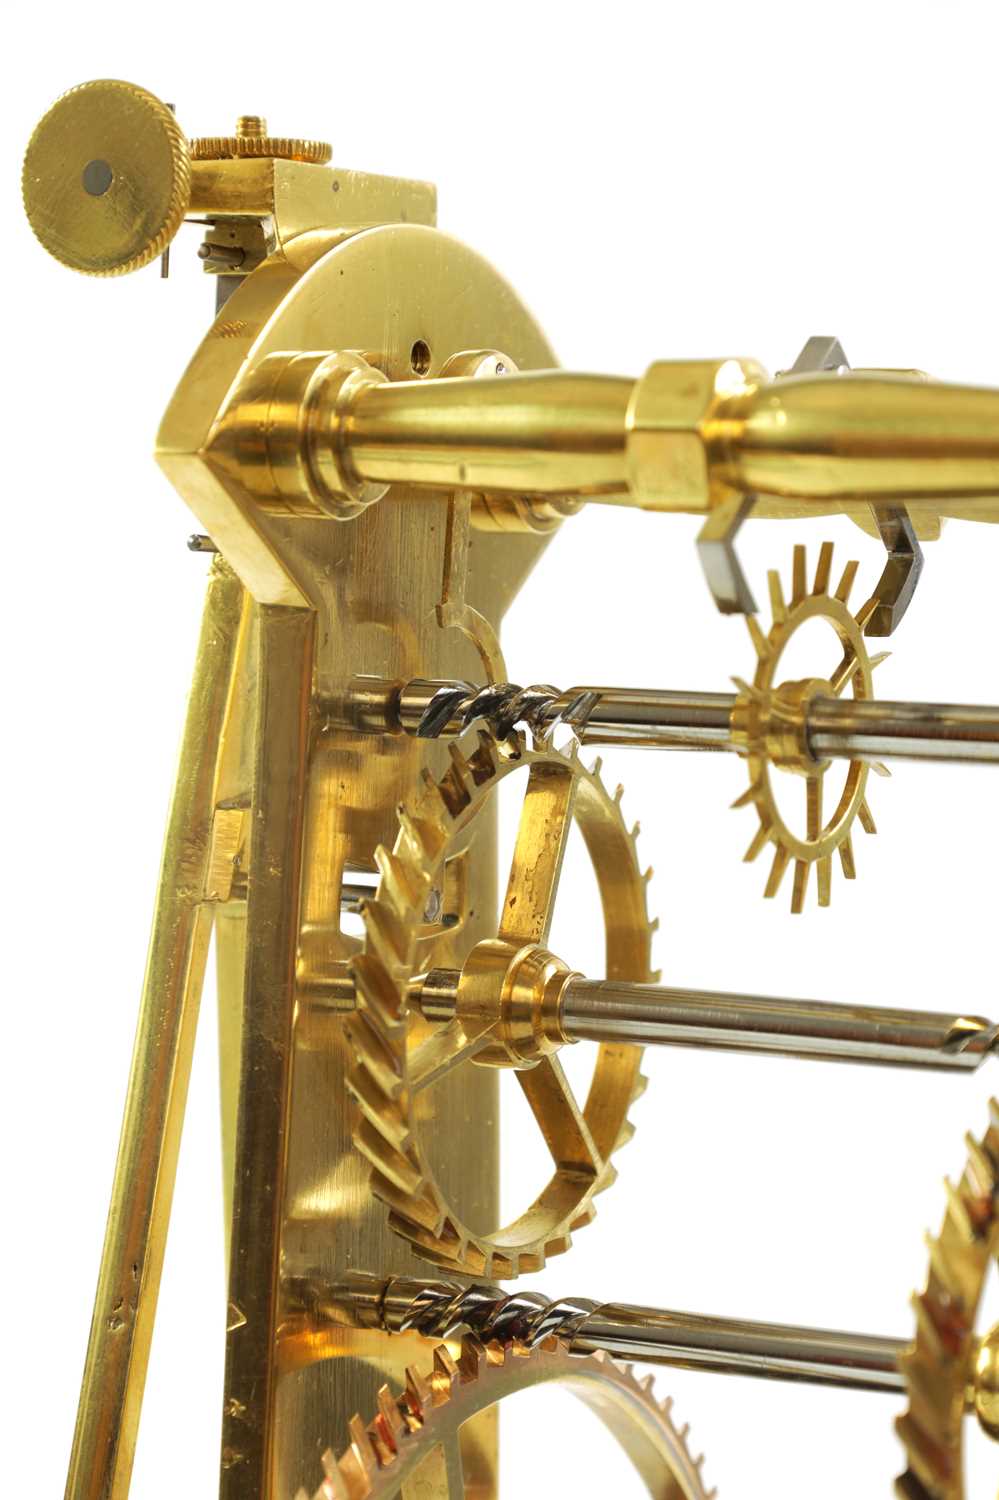 CHARLES MACDOWALL, WAKEFIELD. A RARE WILLIAM IV MONTH DURATION PATENT HELIX LEVER SKELETON CLOCK CIR - Image 6 of 9